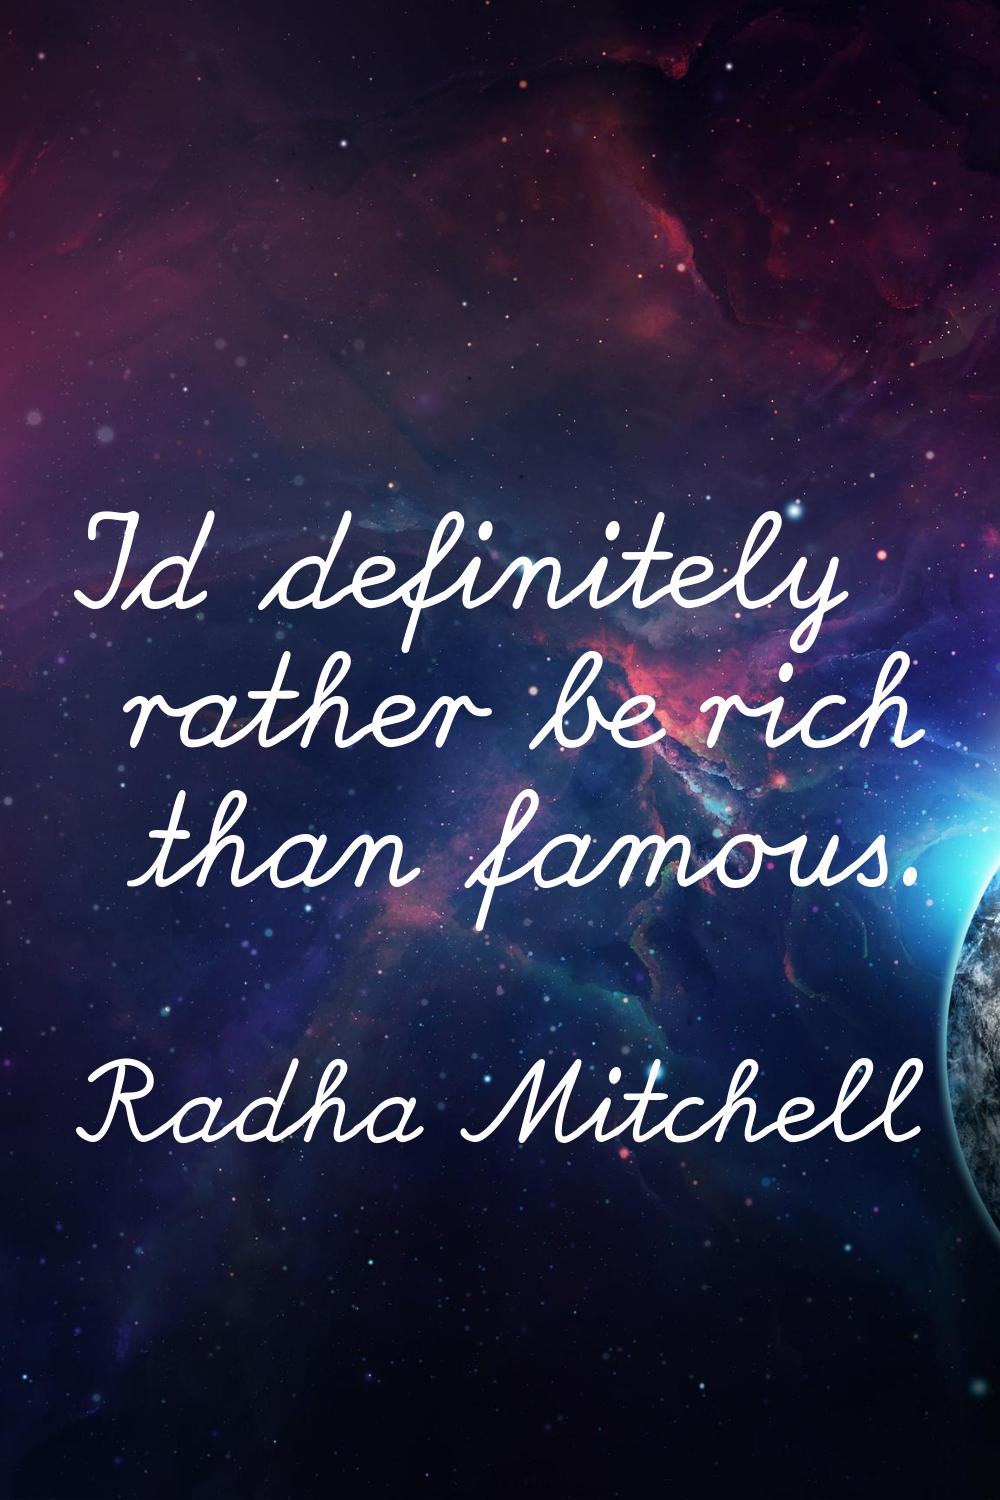 I'd definitely rather be rich than famous.